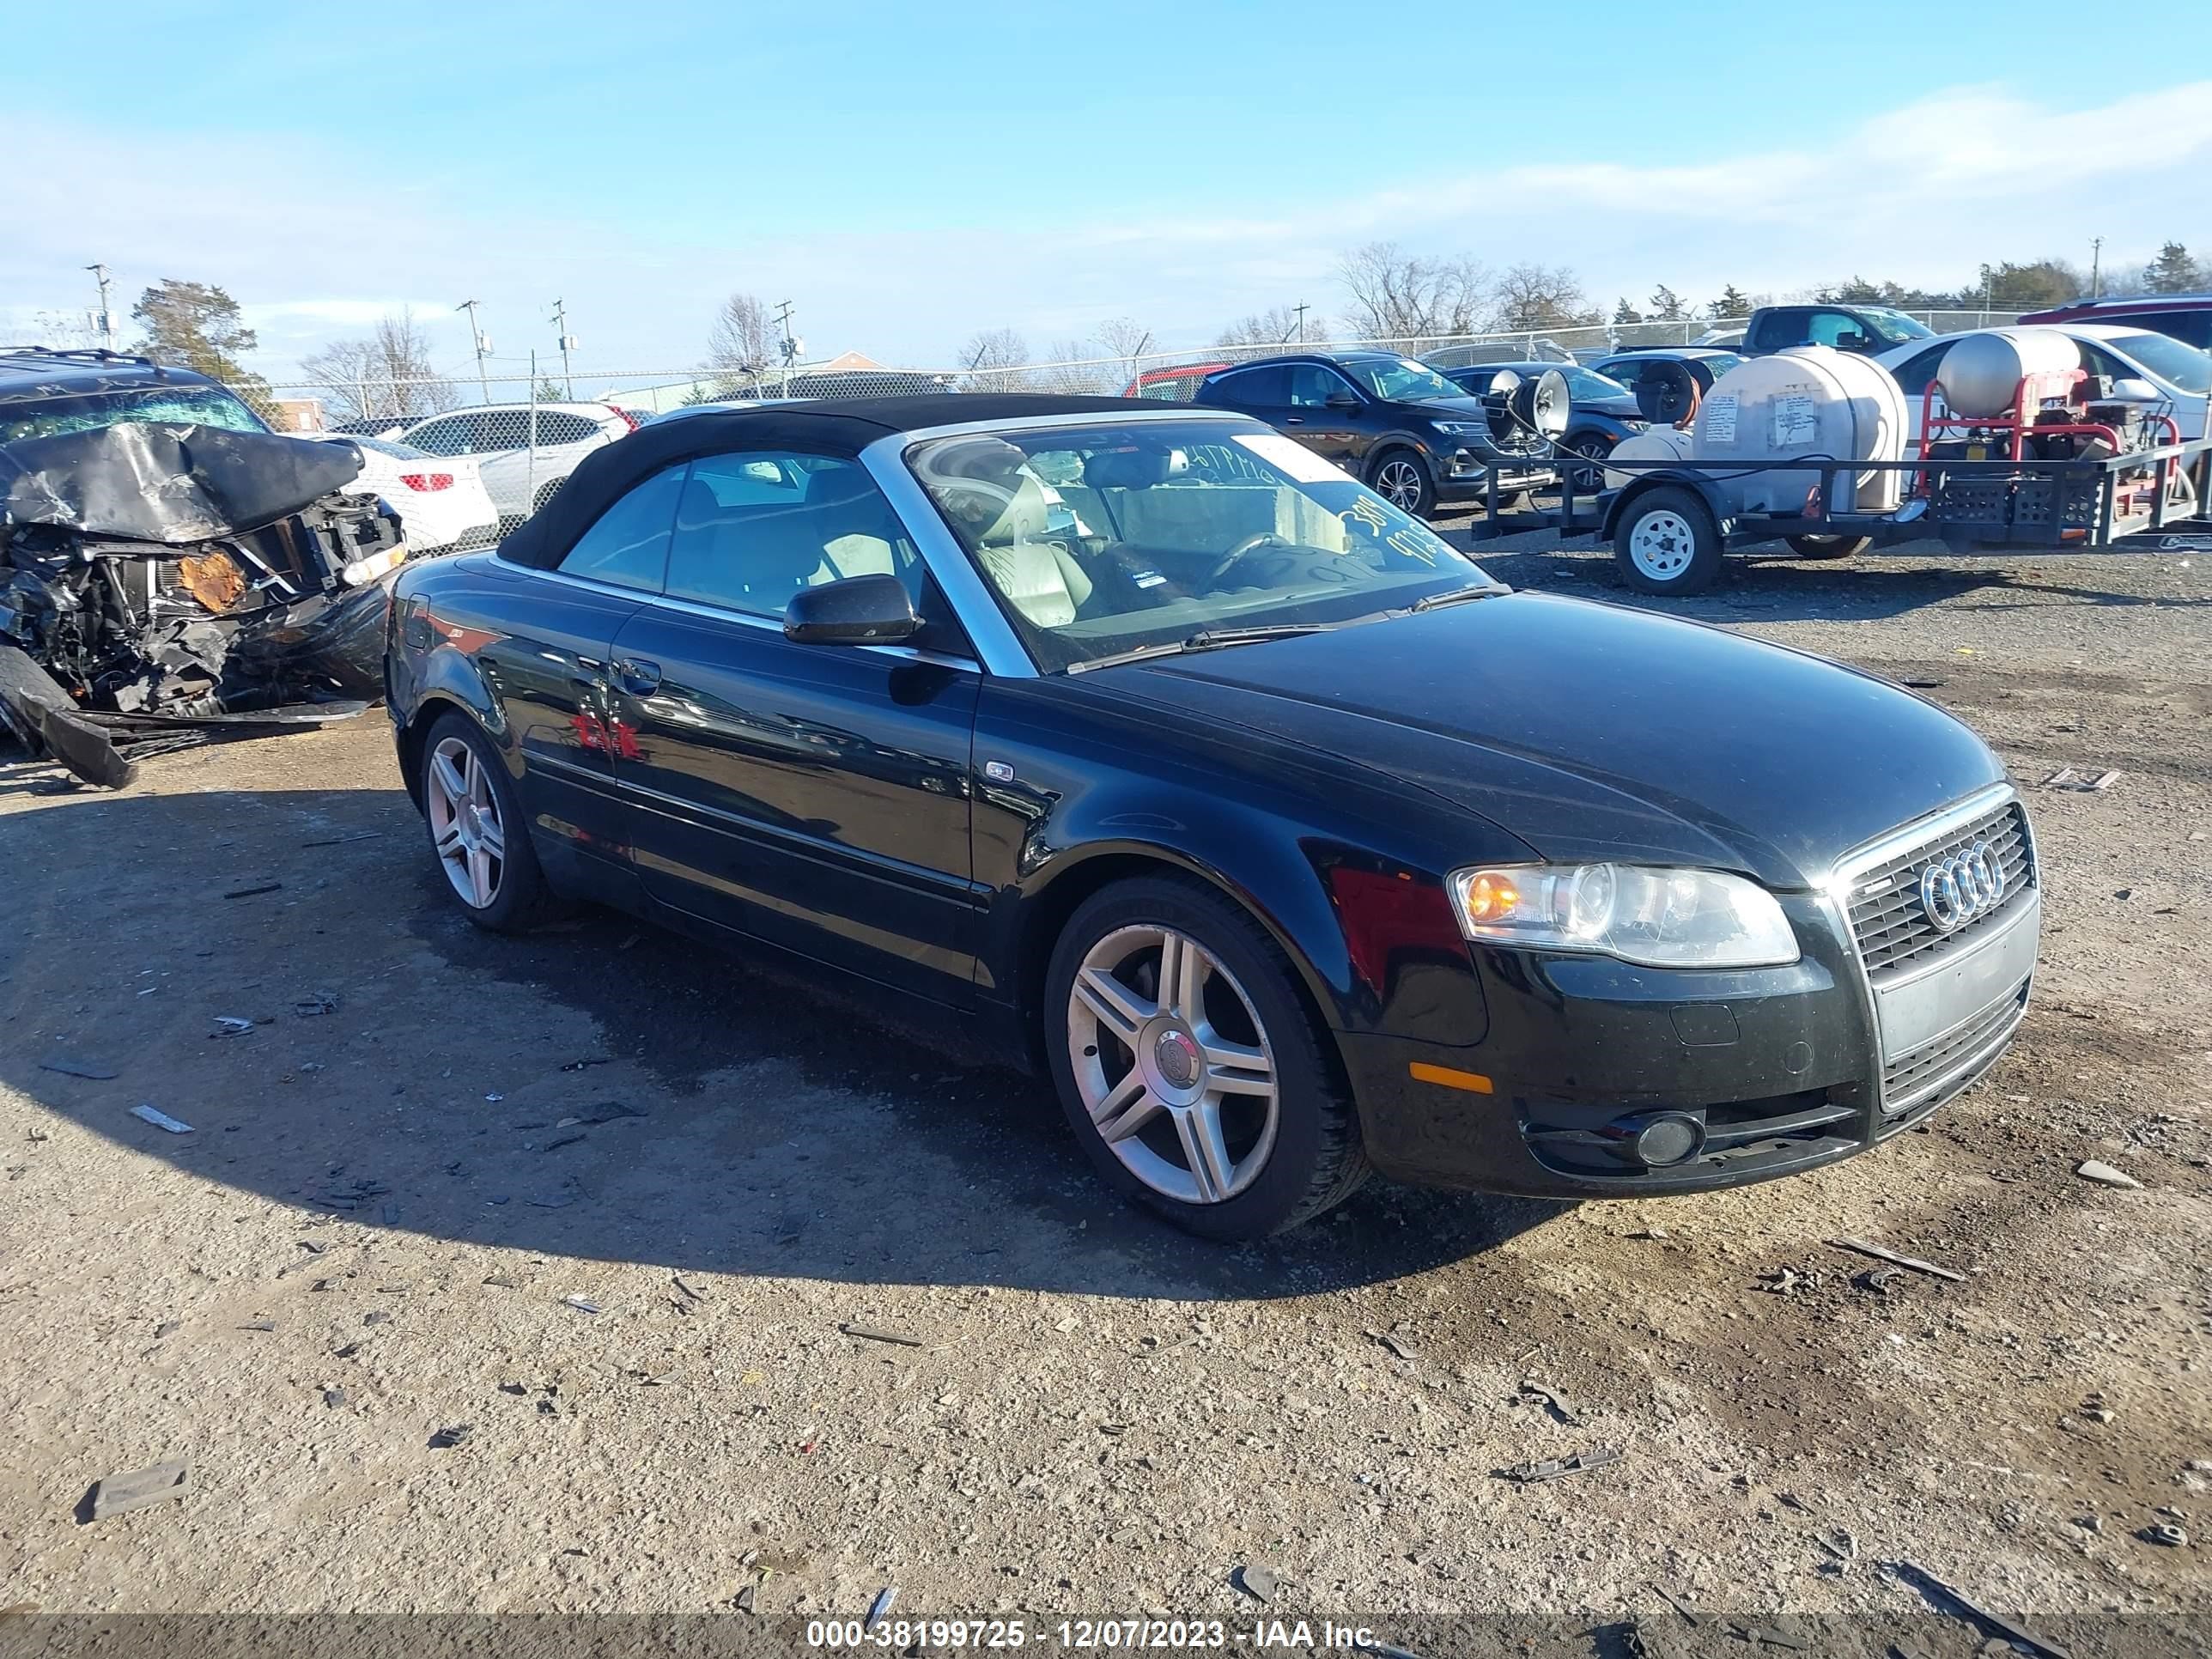 vin: WAUDF48H07K035666 WAUDF48H07K035666 2007 audi a4 2000 for Sale in 22701, 15201 Review Rd, Culpeper, USA